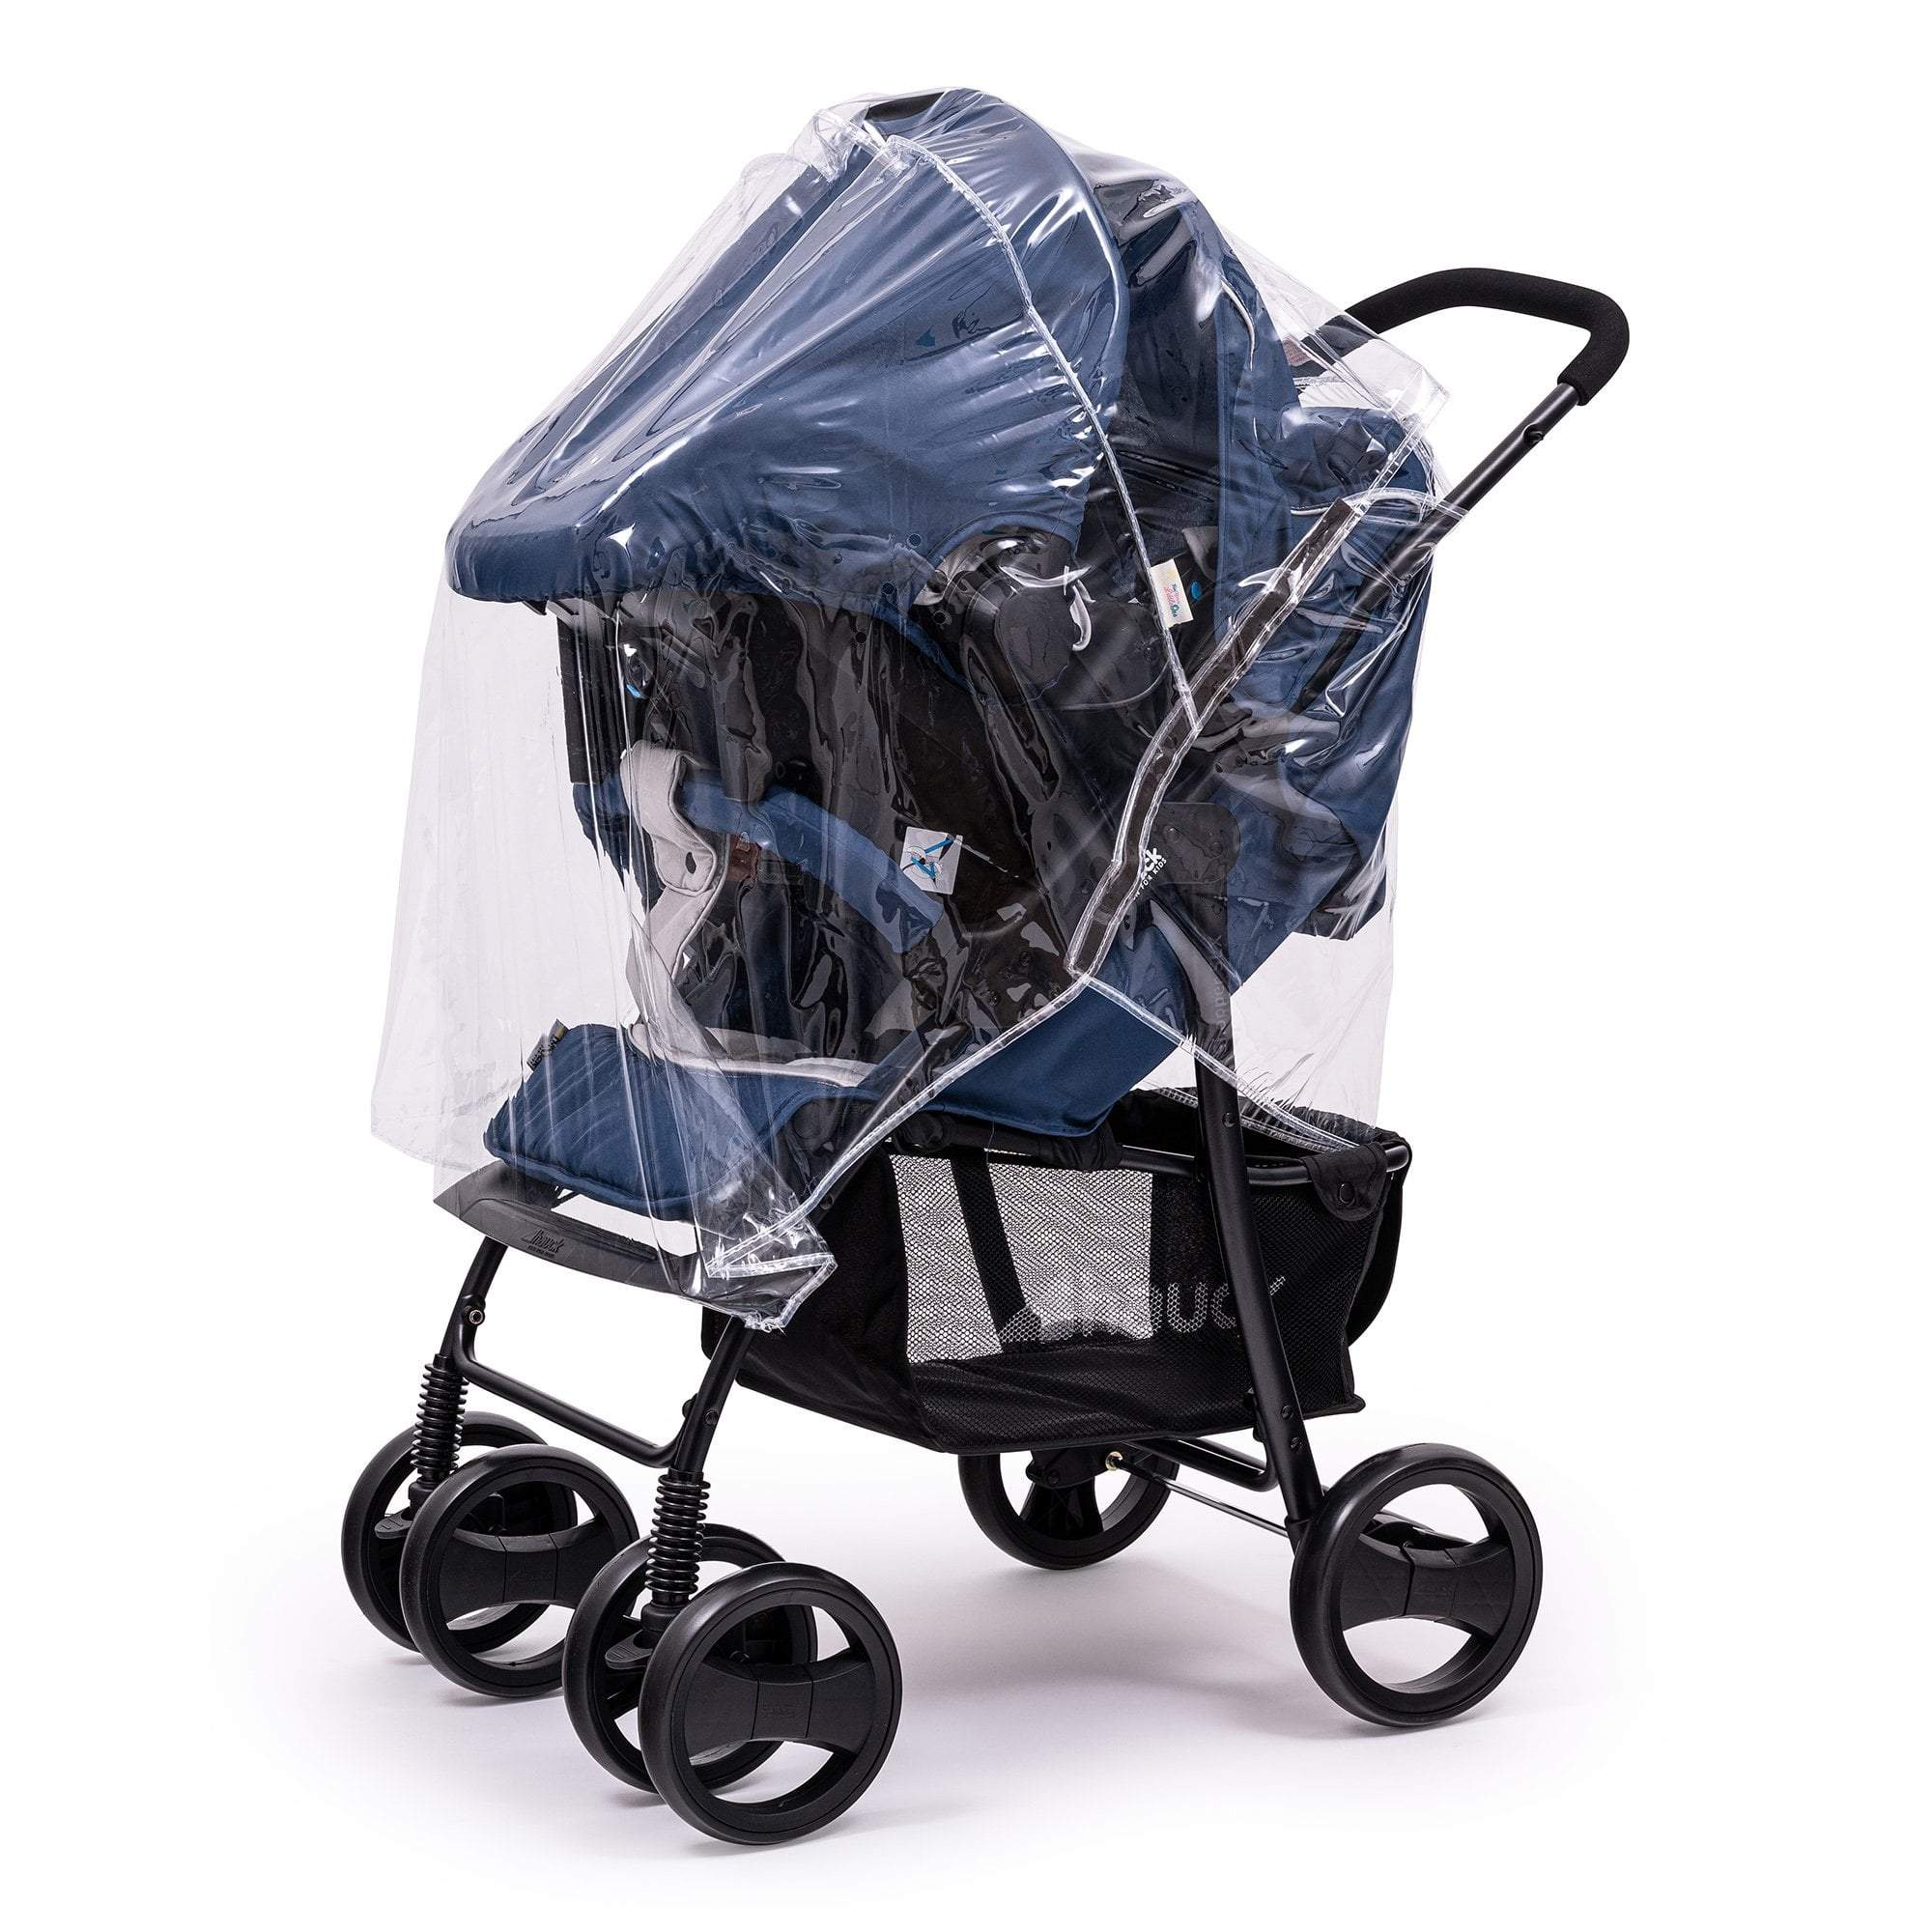 Travel System Raincover Compatible with Bebecar - Fits All Models -  | For Your Little One